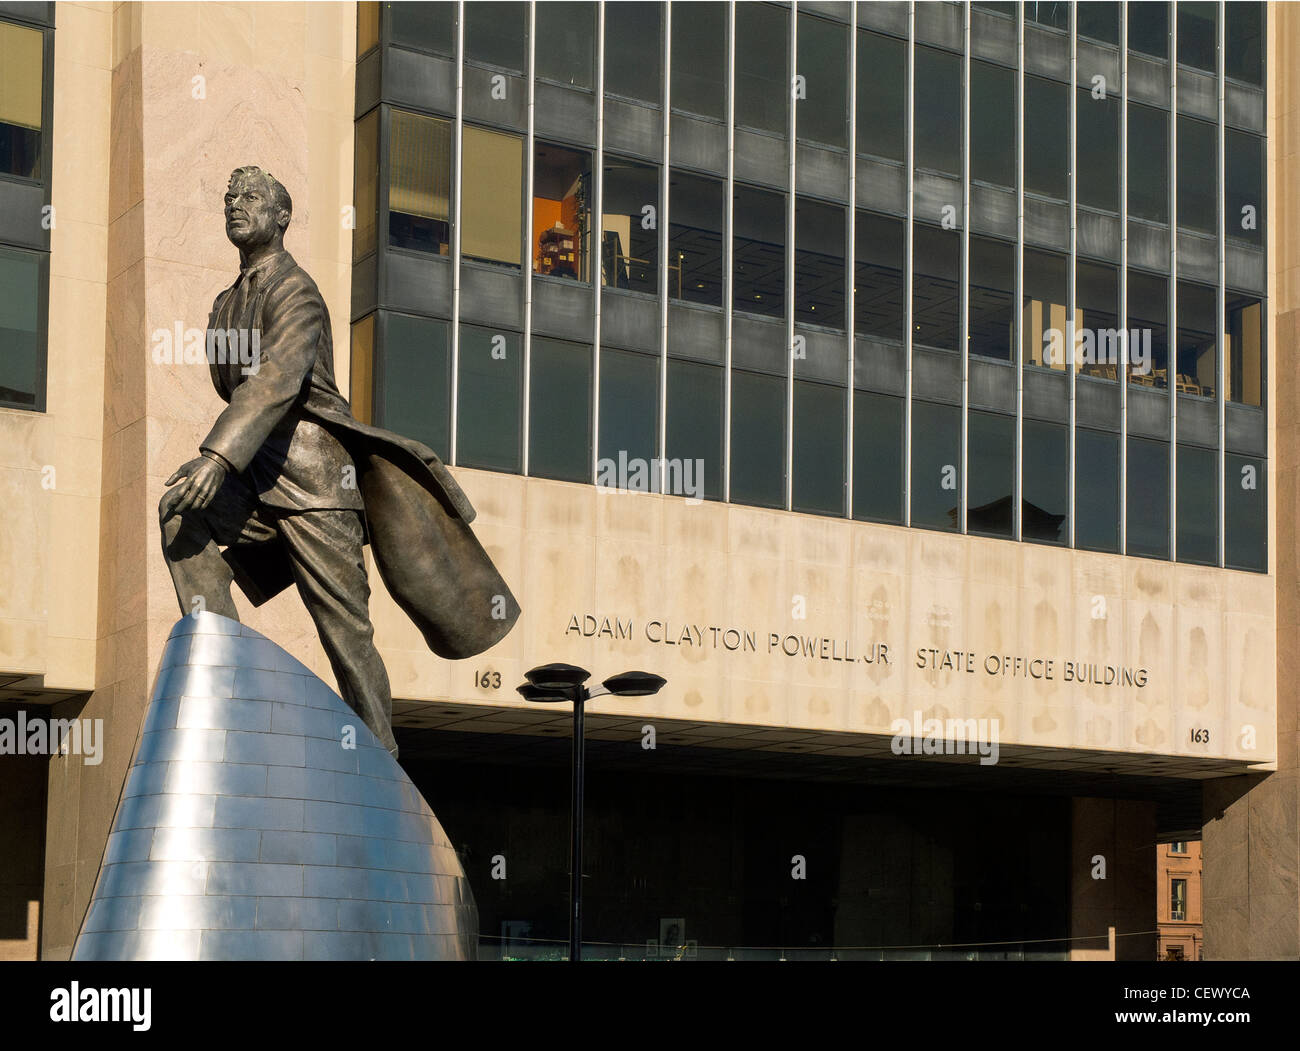 Adam clayton powell jr hi-res stock photography and images - Alamy